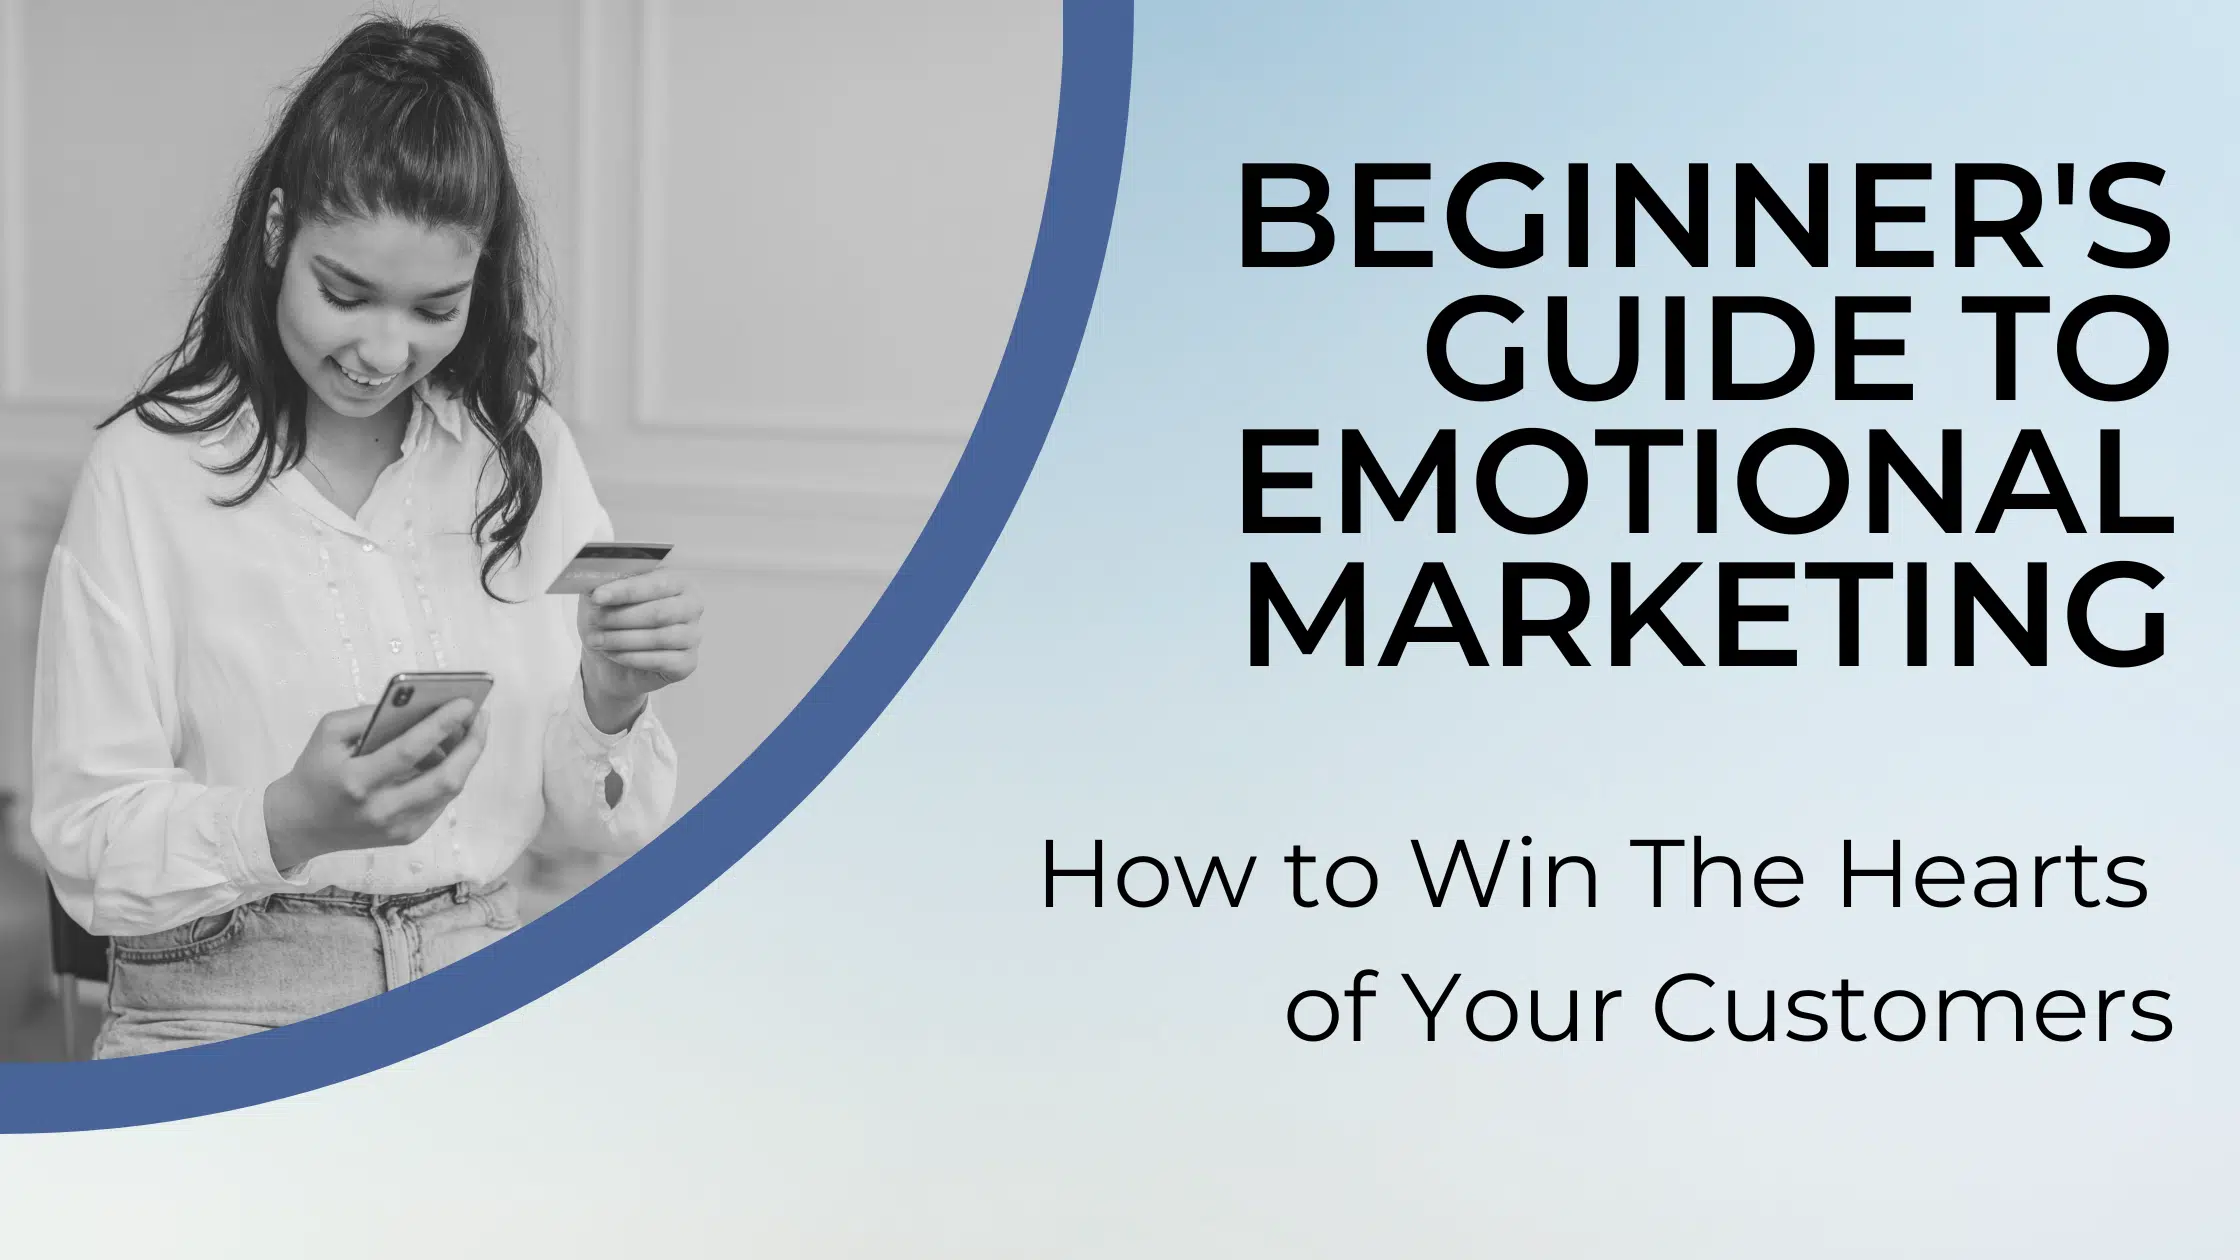 Beginner's Guide to Emotional Marketing: How to Win The Hearts of Your Customers